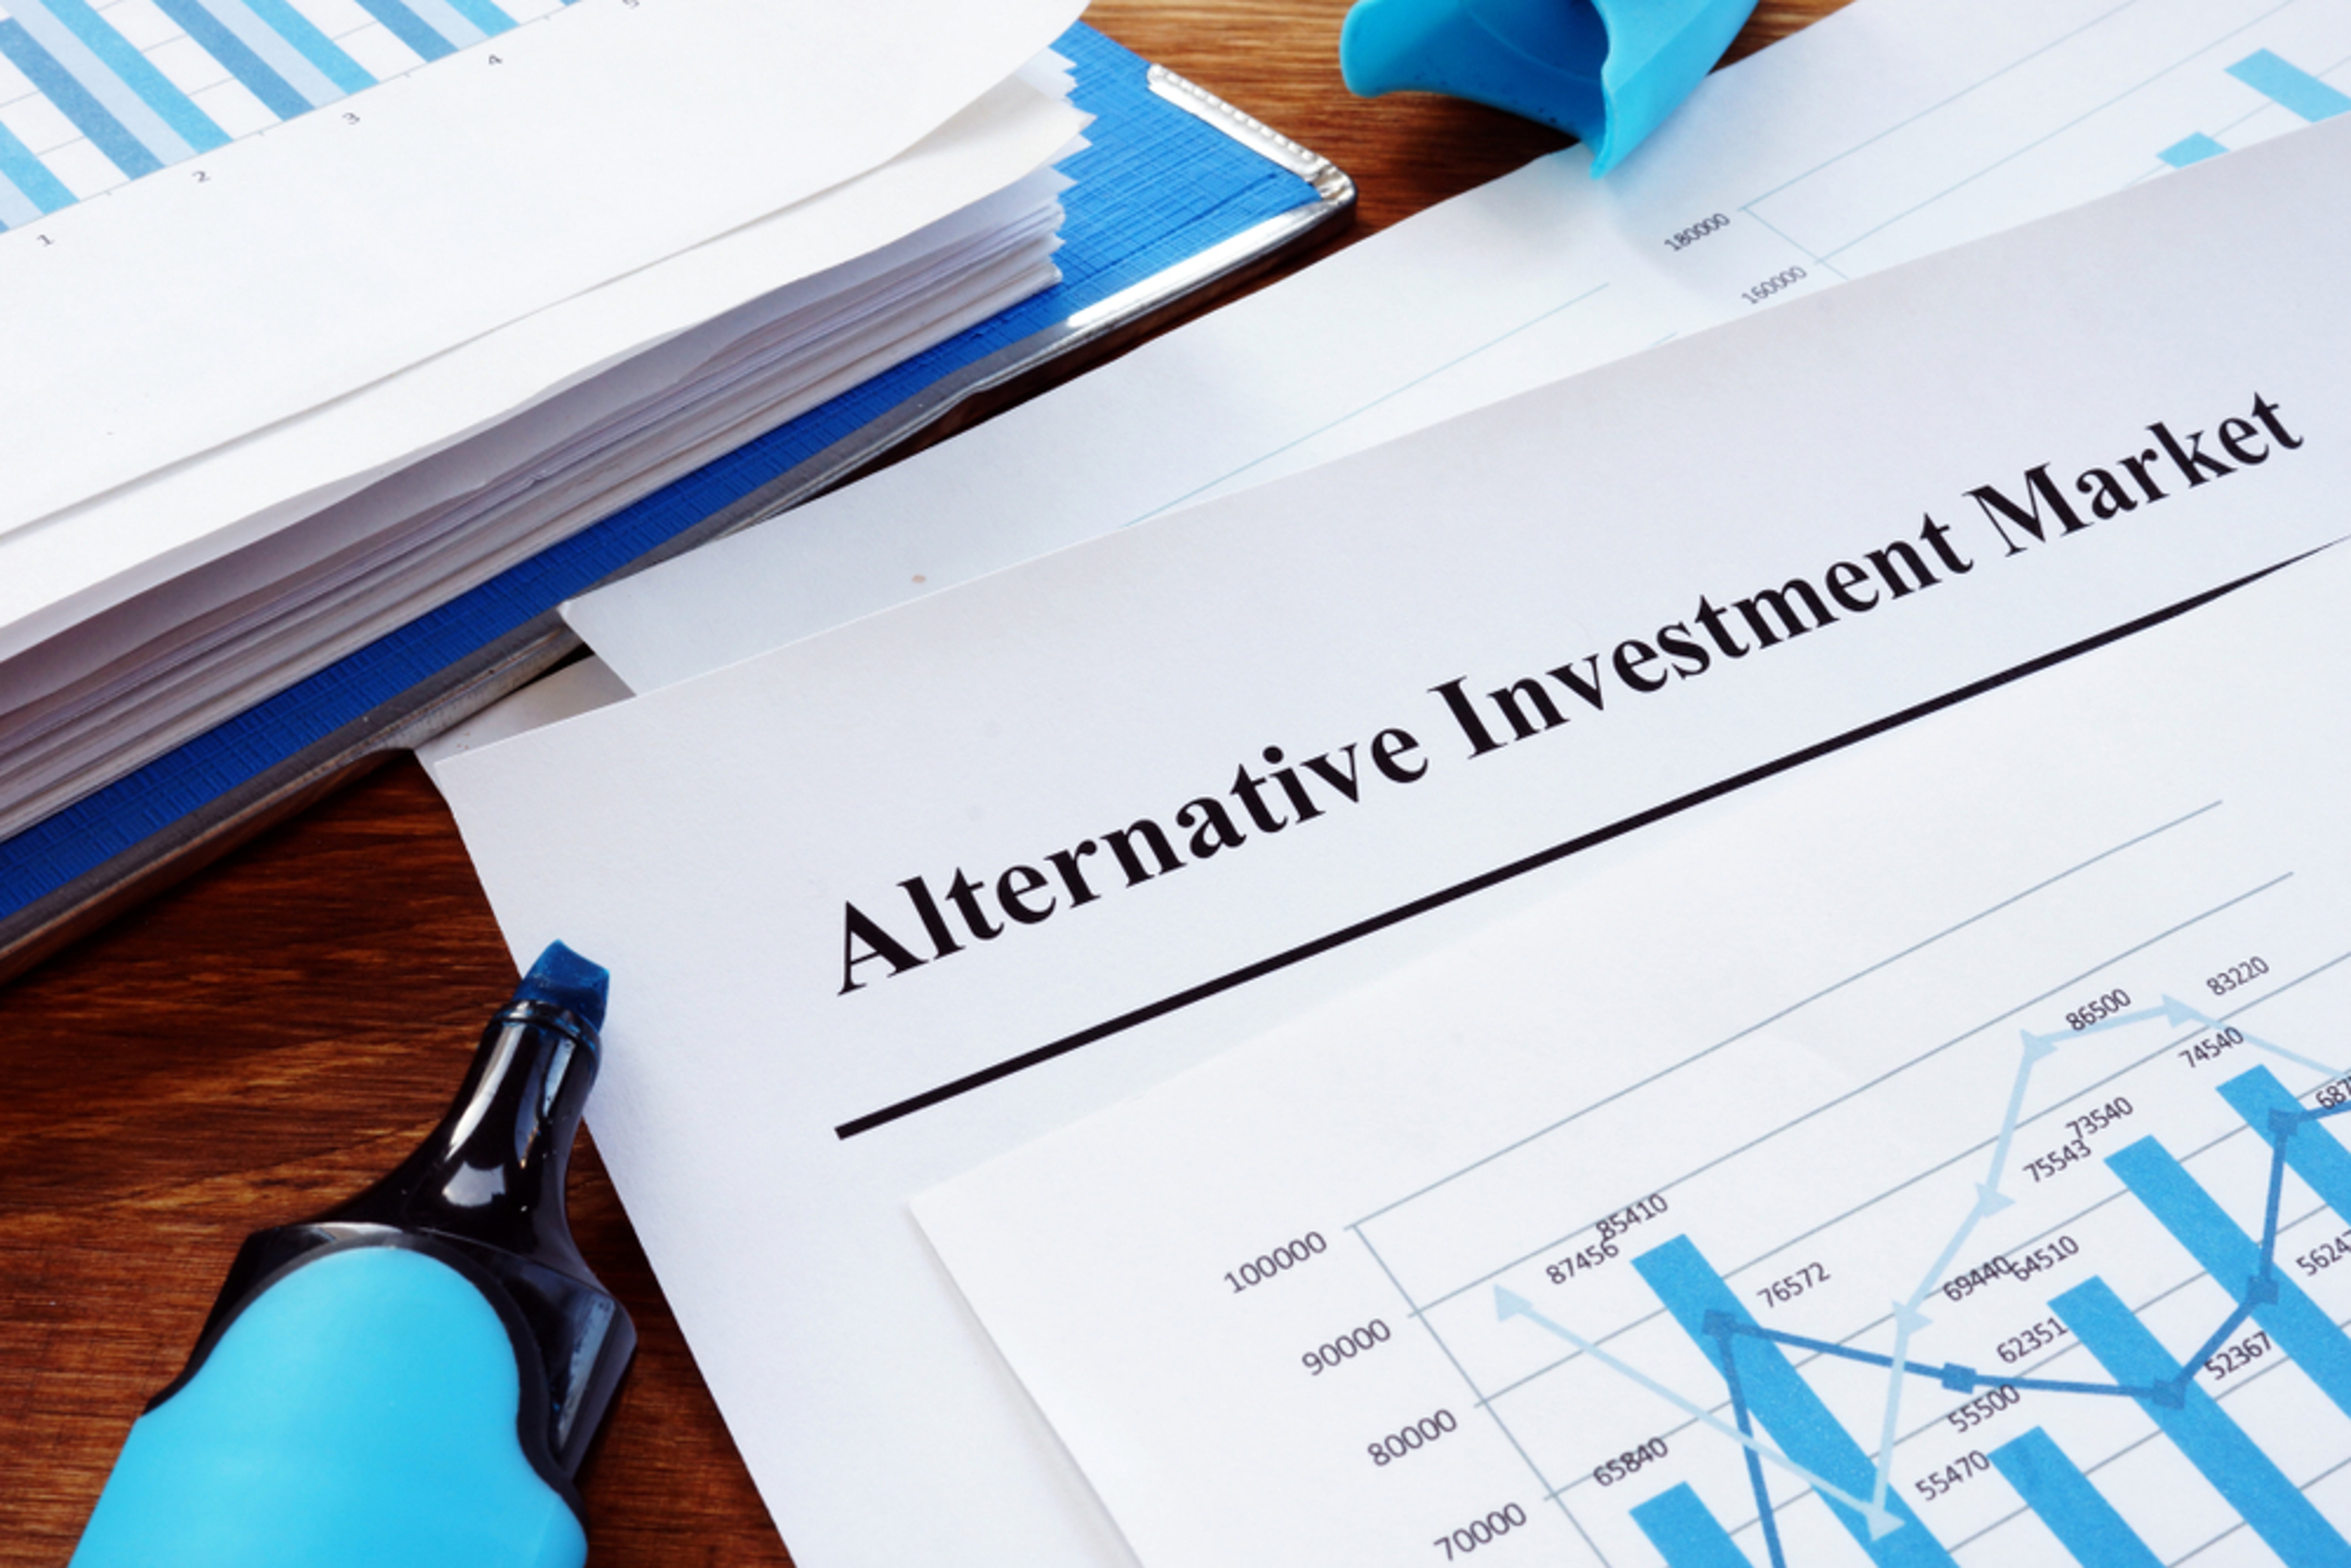 Yieldstreet Provides Q3 Update On Its Alternative Investments